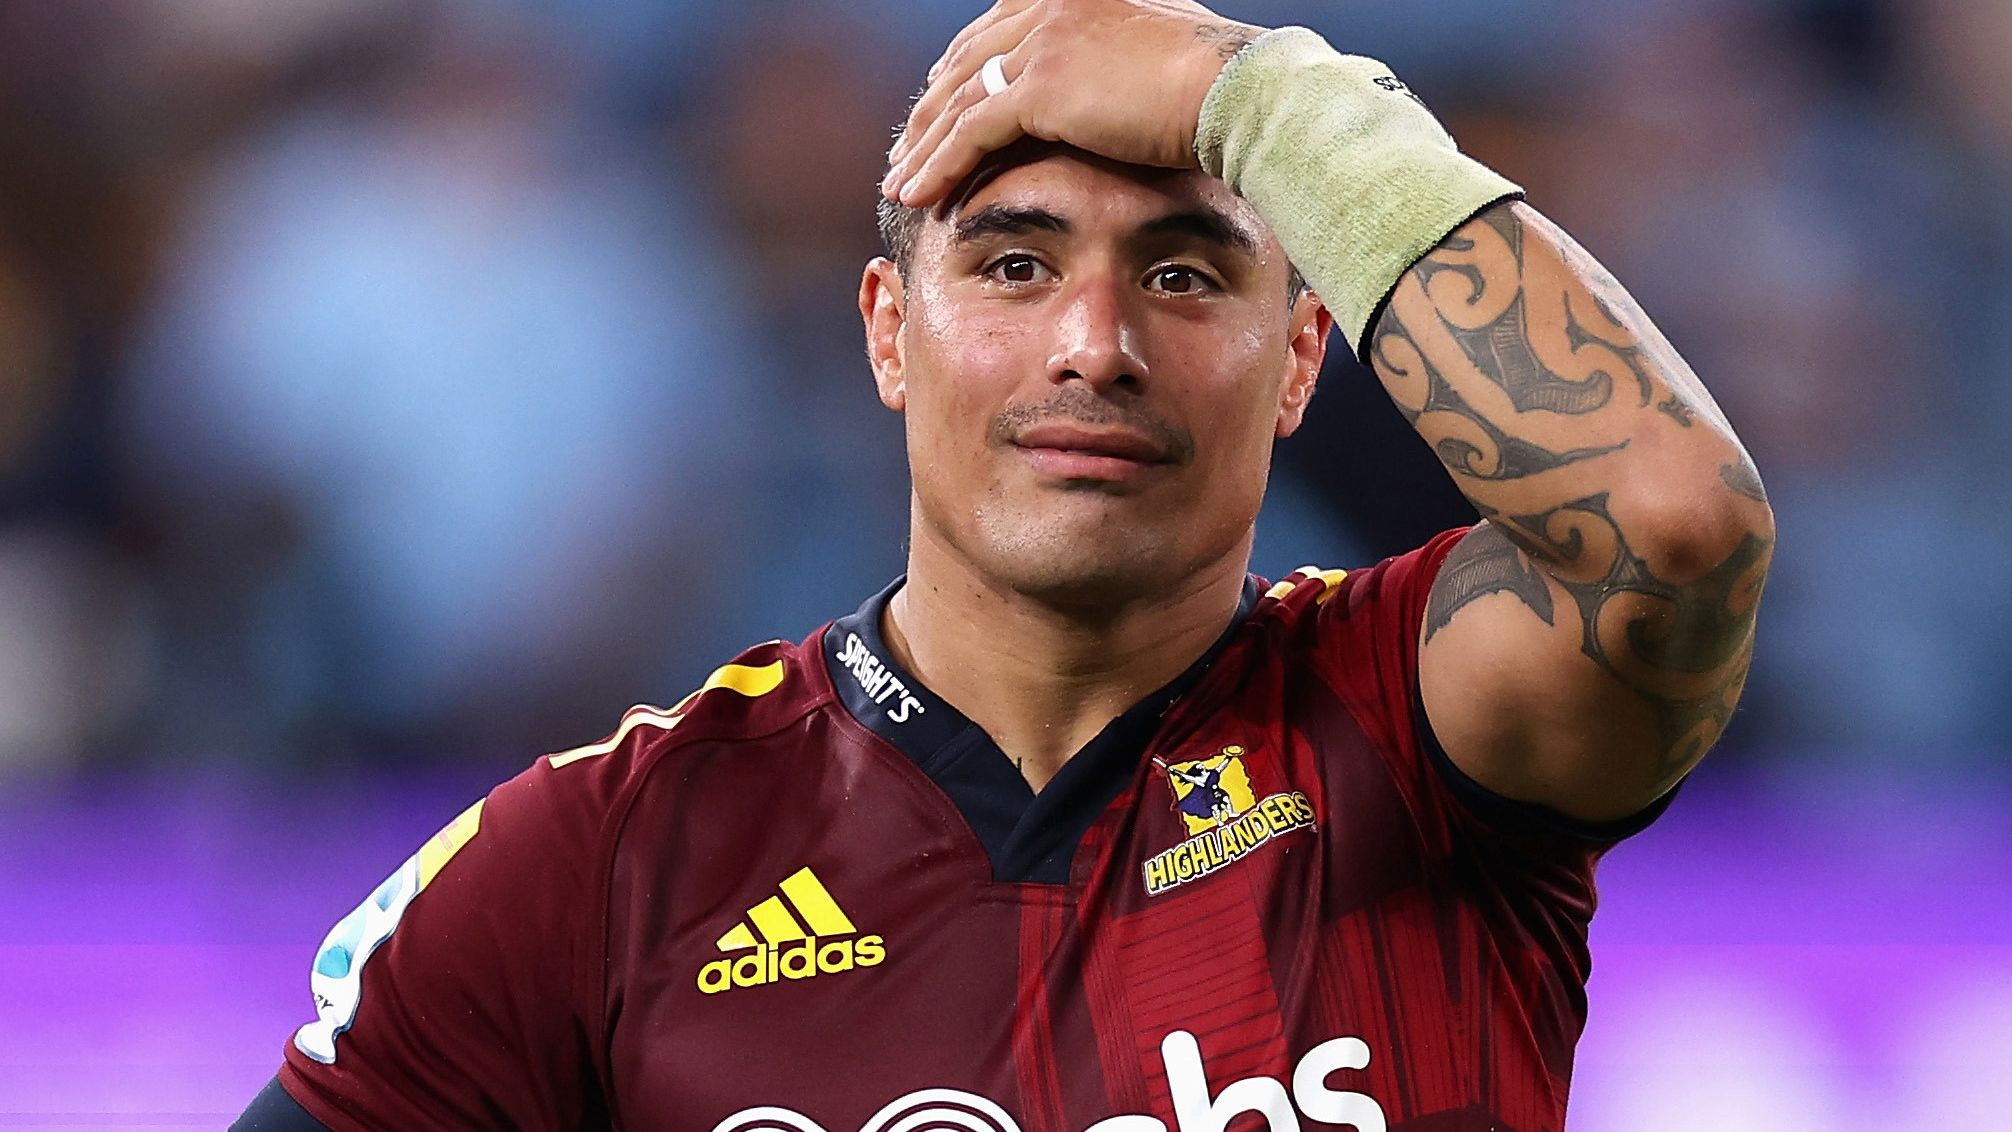 Highlanders captain Aaron Smith was left scratching his head after coming up one point short of victory against the Waratahs.